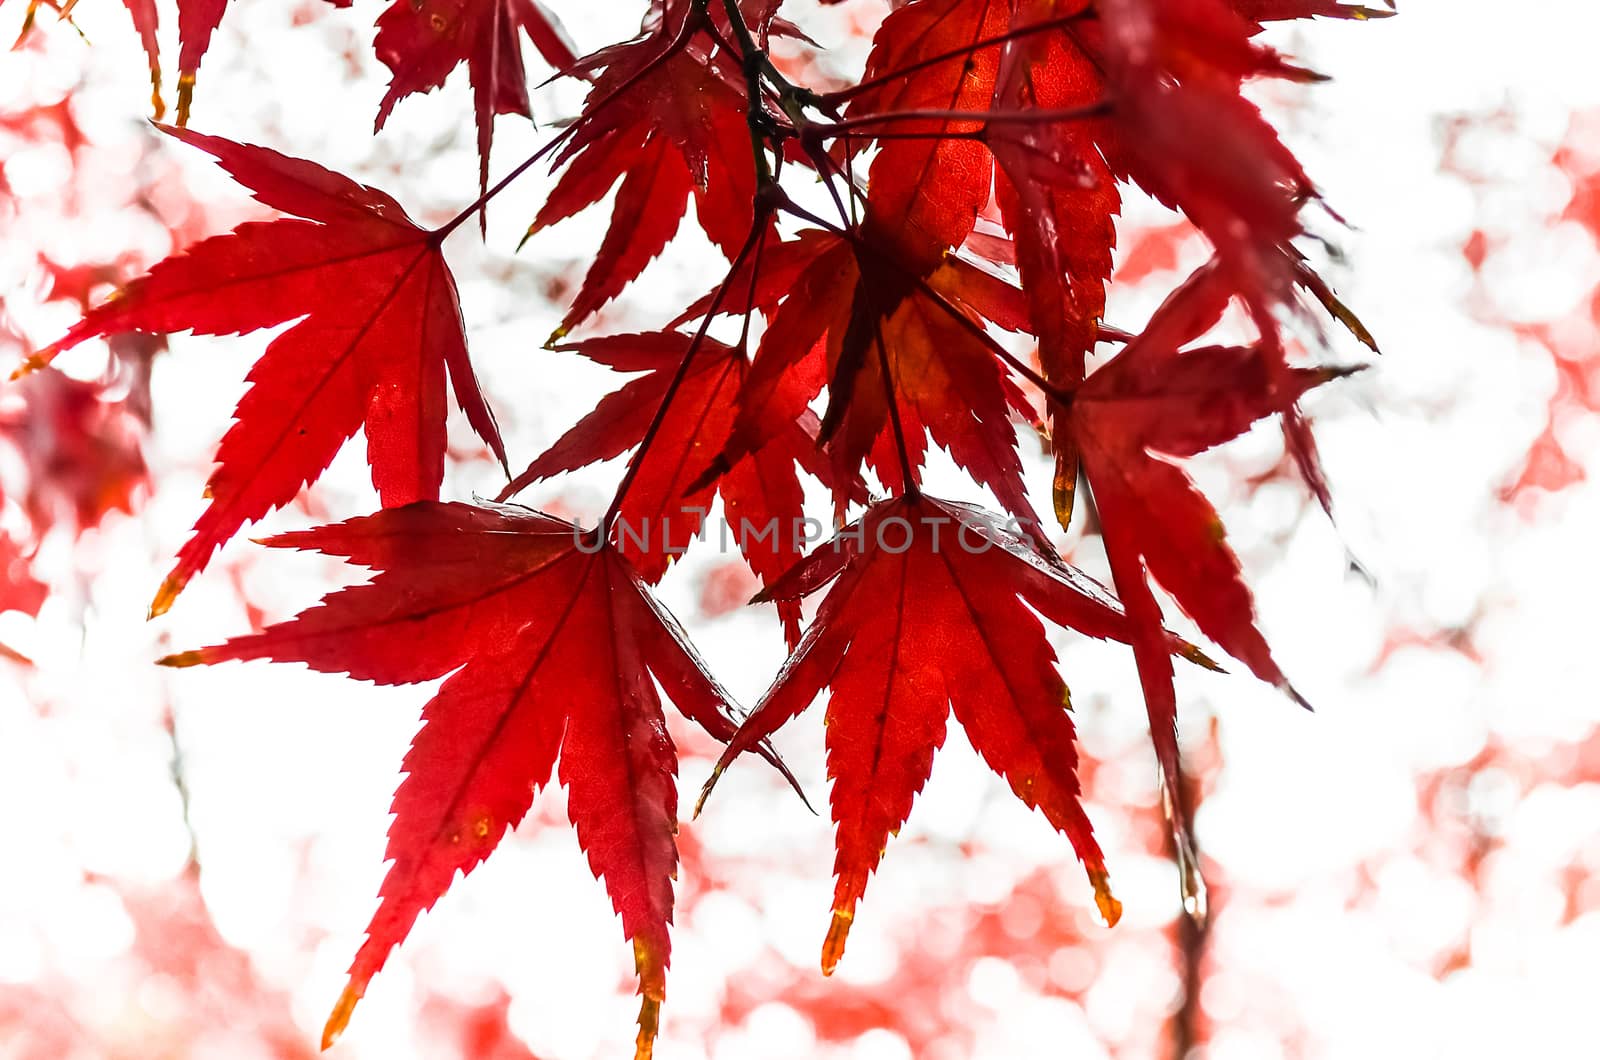 Red Maple Leaves in Autumn by gypsygraphy